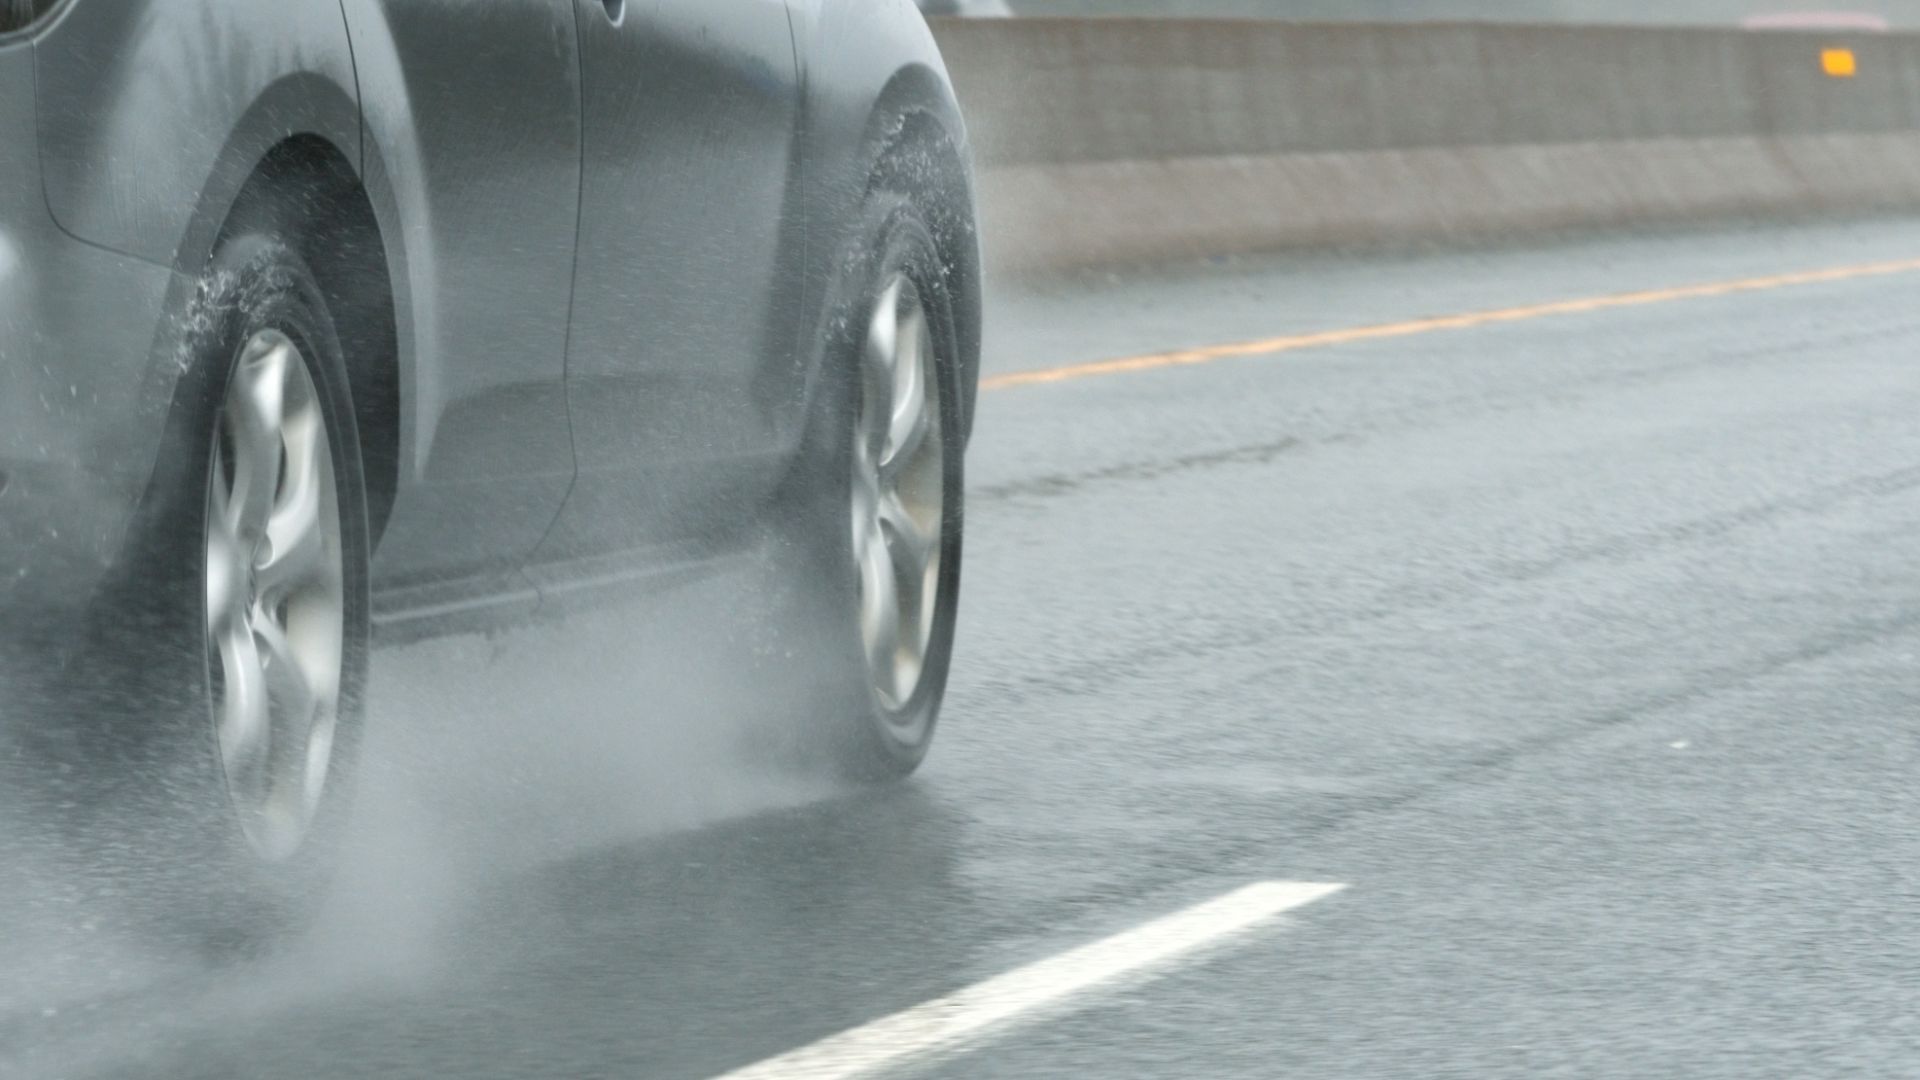 a car driving on a wet road in the rain.